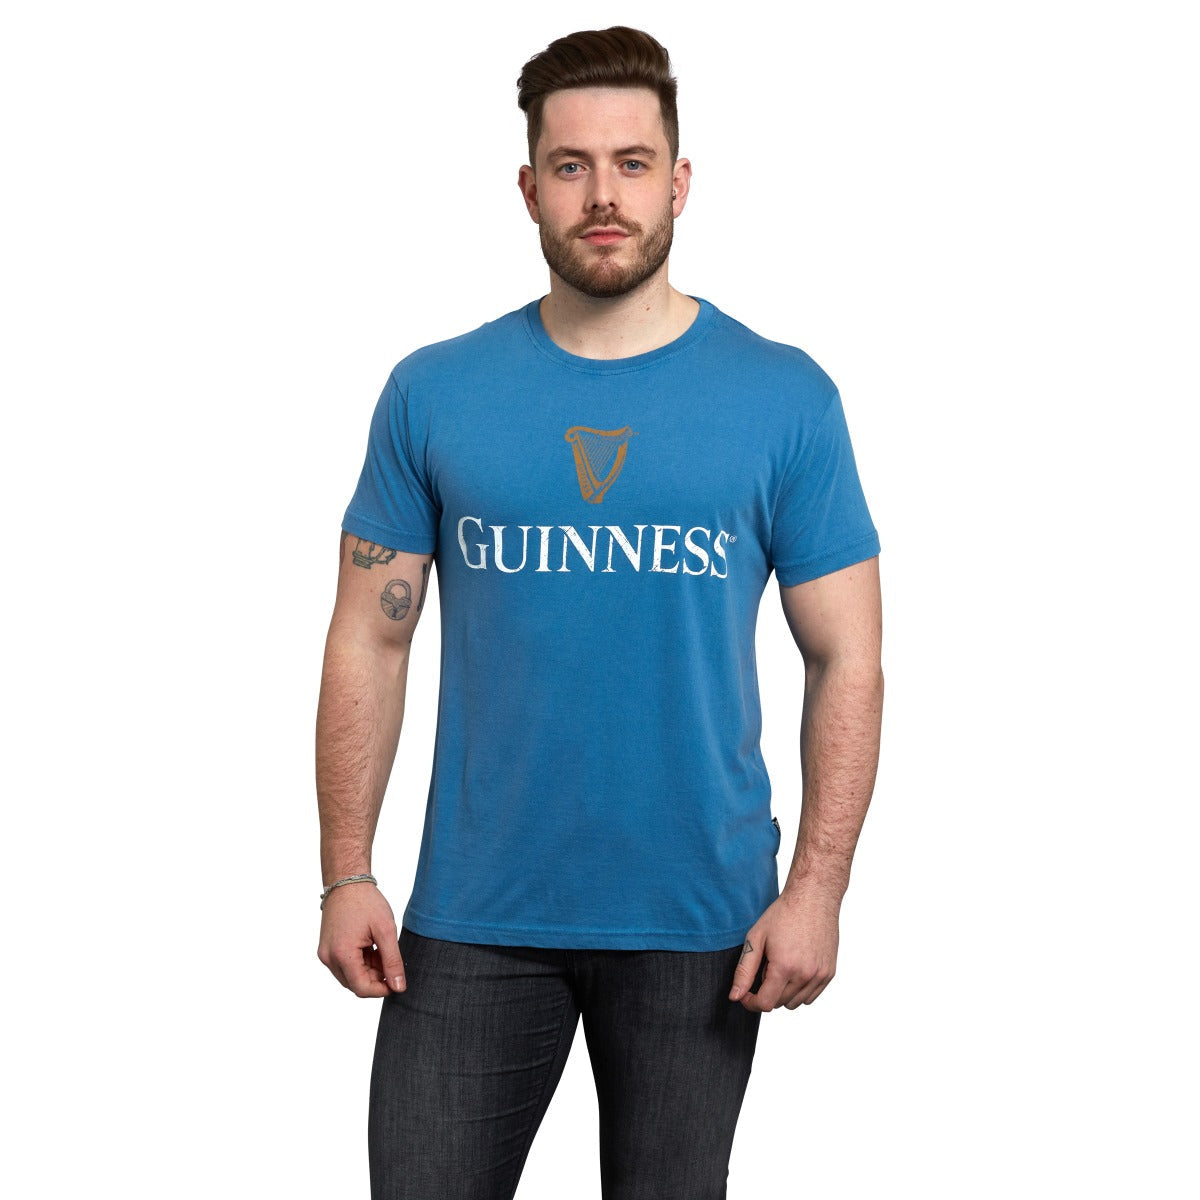 A person wearing a Blue Guinness Harp Premium Tee with the Guinness® Trademark Label and dark jeans, standing against a plain white background.